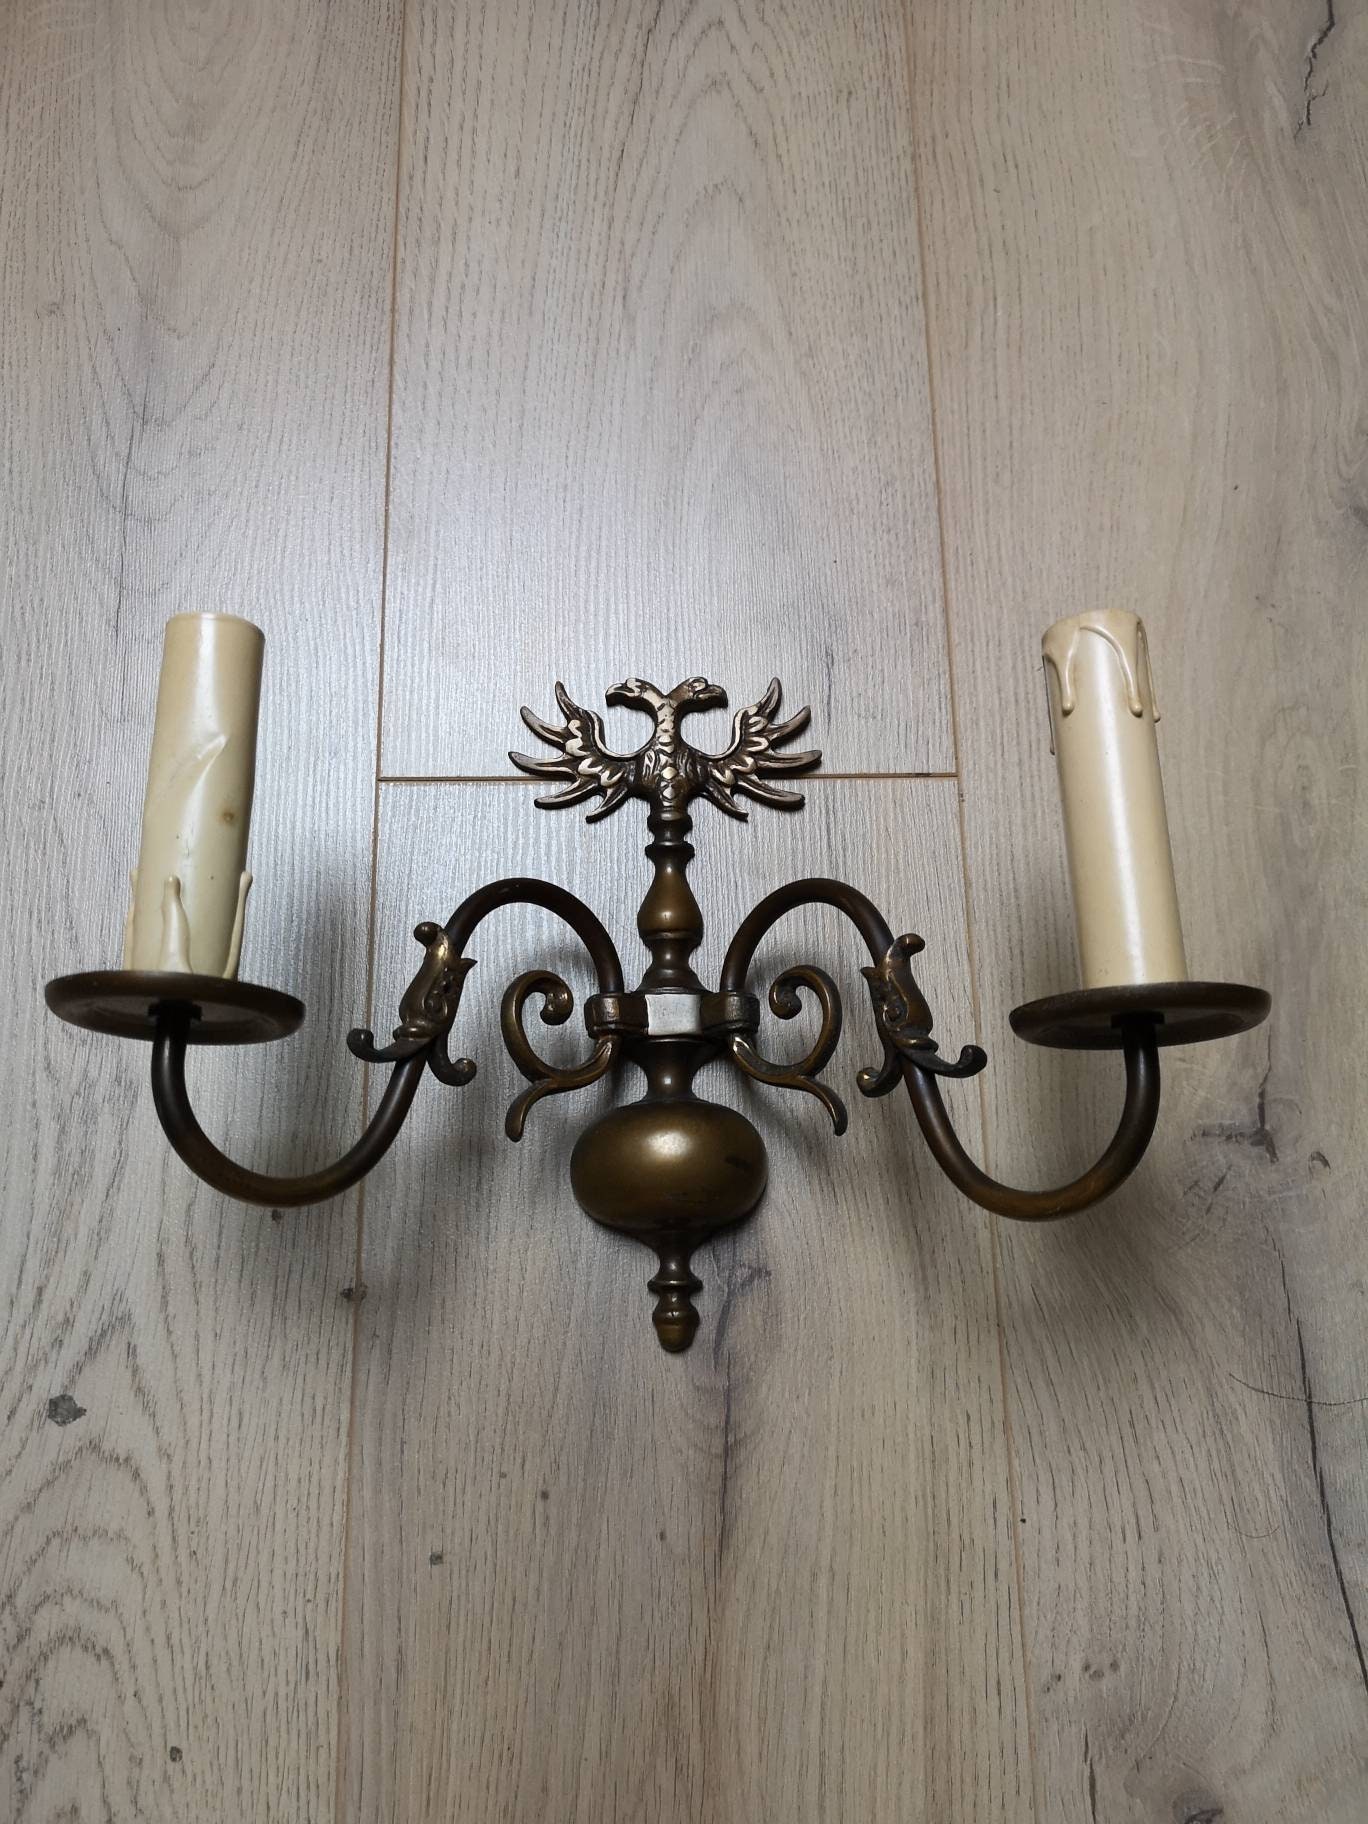 Ramp With 2 Arms - Eagle Open Wings Deco Spherical Plate Wall Candlestick Hall Lighting